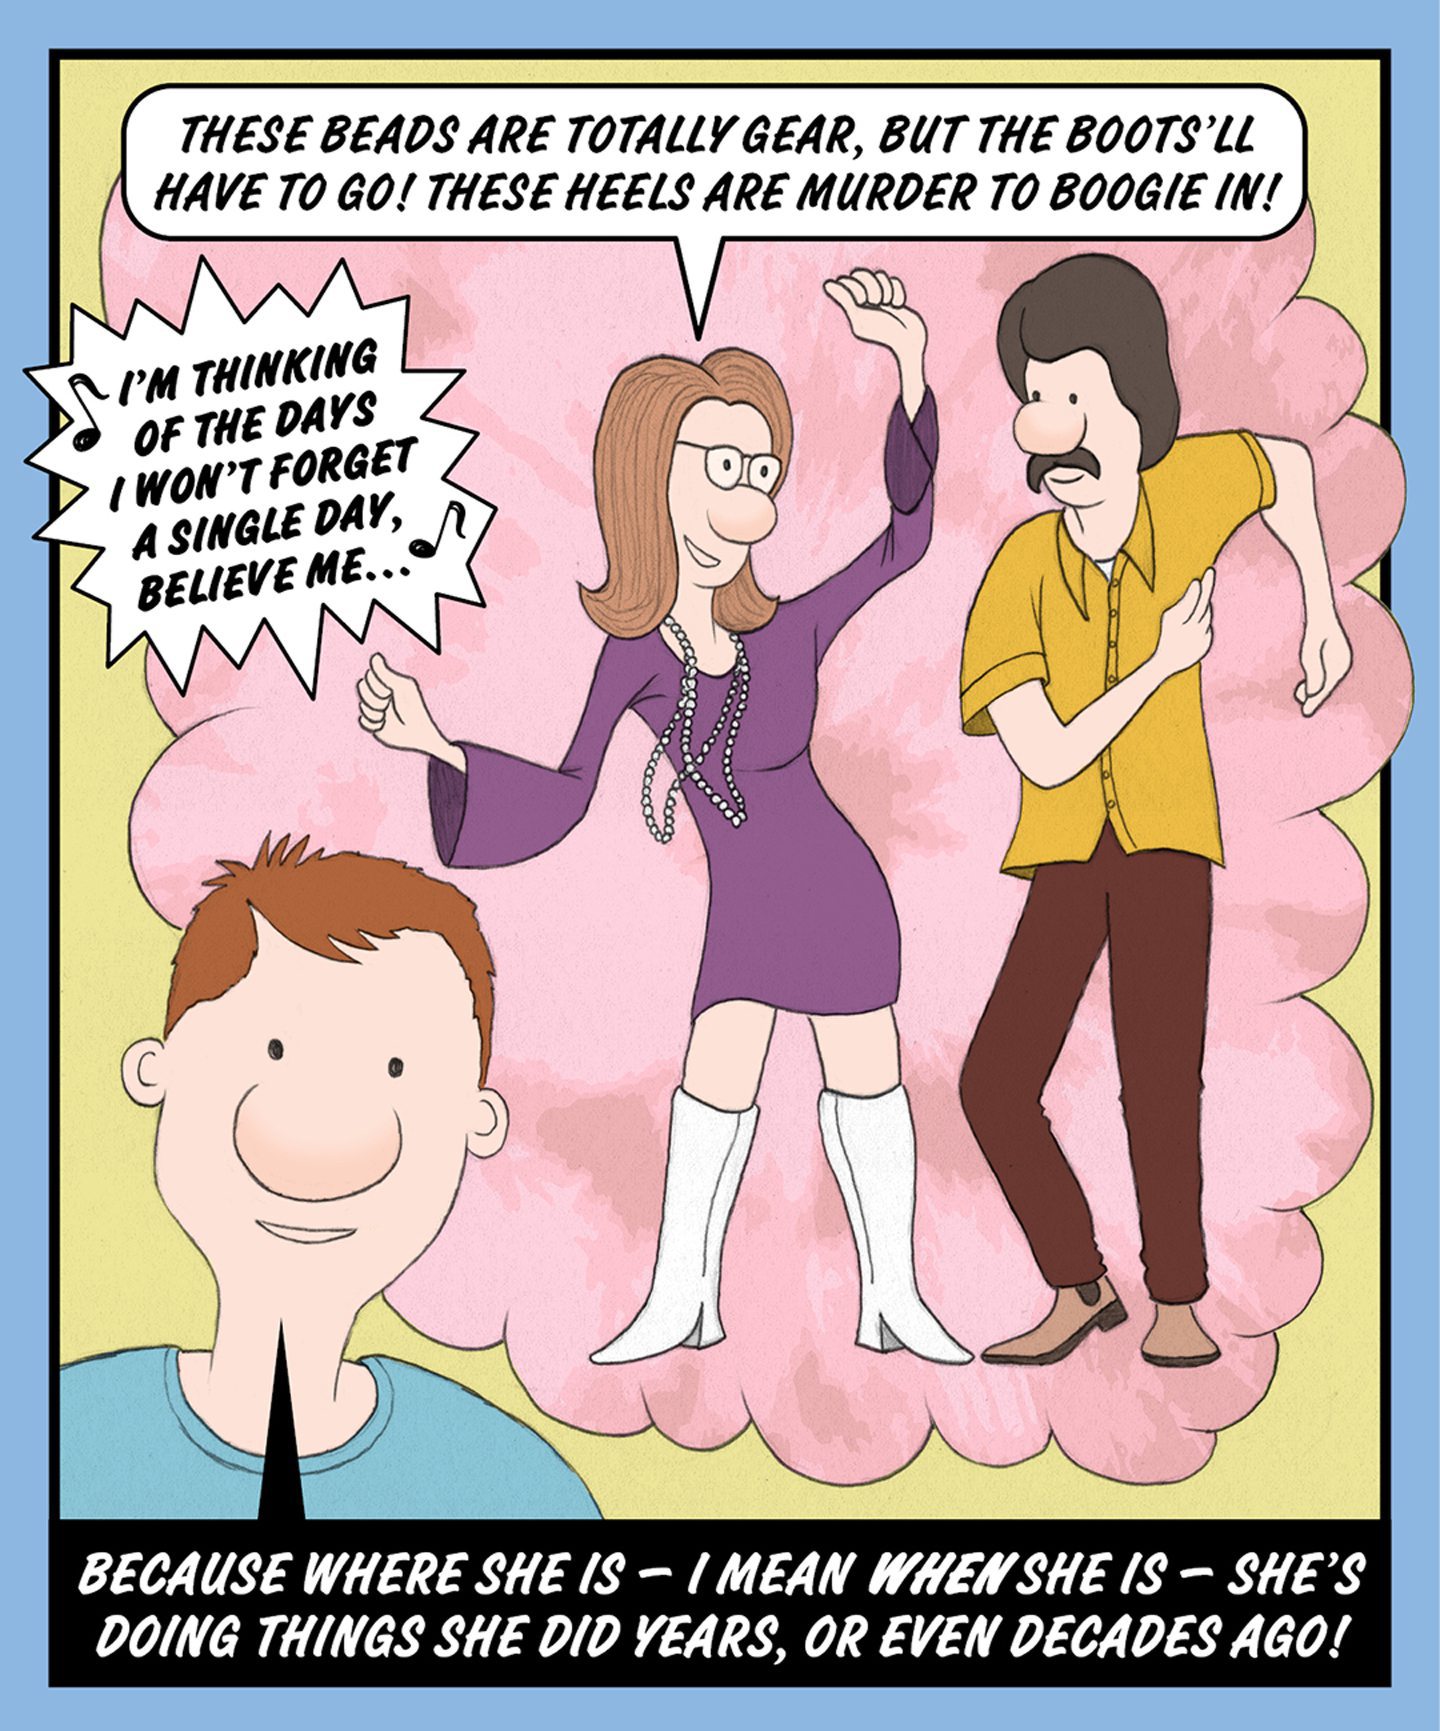 A comic illustration of a man and a woman from the 70s era dancing. The speech bubble from the young woman reads: THESE BEADS ARE TOTALLY GEAR, BUT THE BOOTS'LL HAVE TO GO! THESE HEELS ARE MURDER TO BOOGIE IN! The text below the image reads: BECAUSE WHERE SHE IS — I MEAN WHEN SHE IS — SHE'S DOING THINGS SHE DID YEARS, OR EVEN DECADES AGO! 